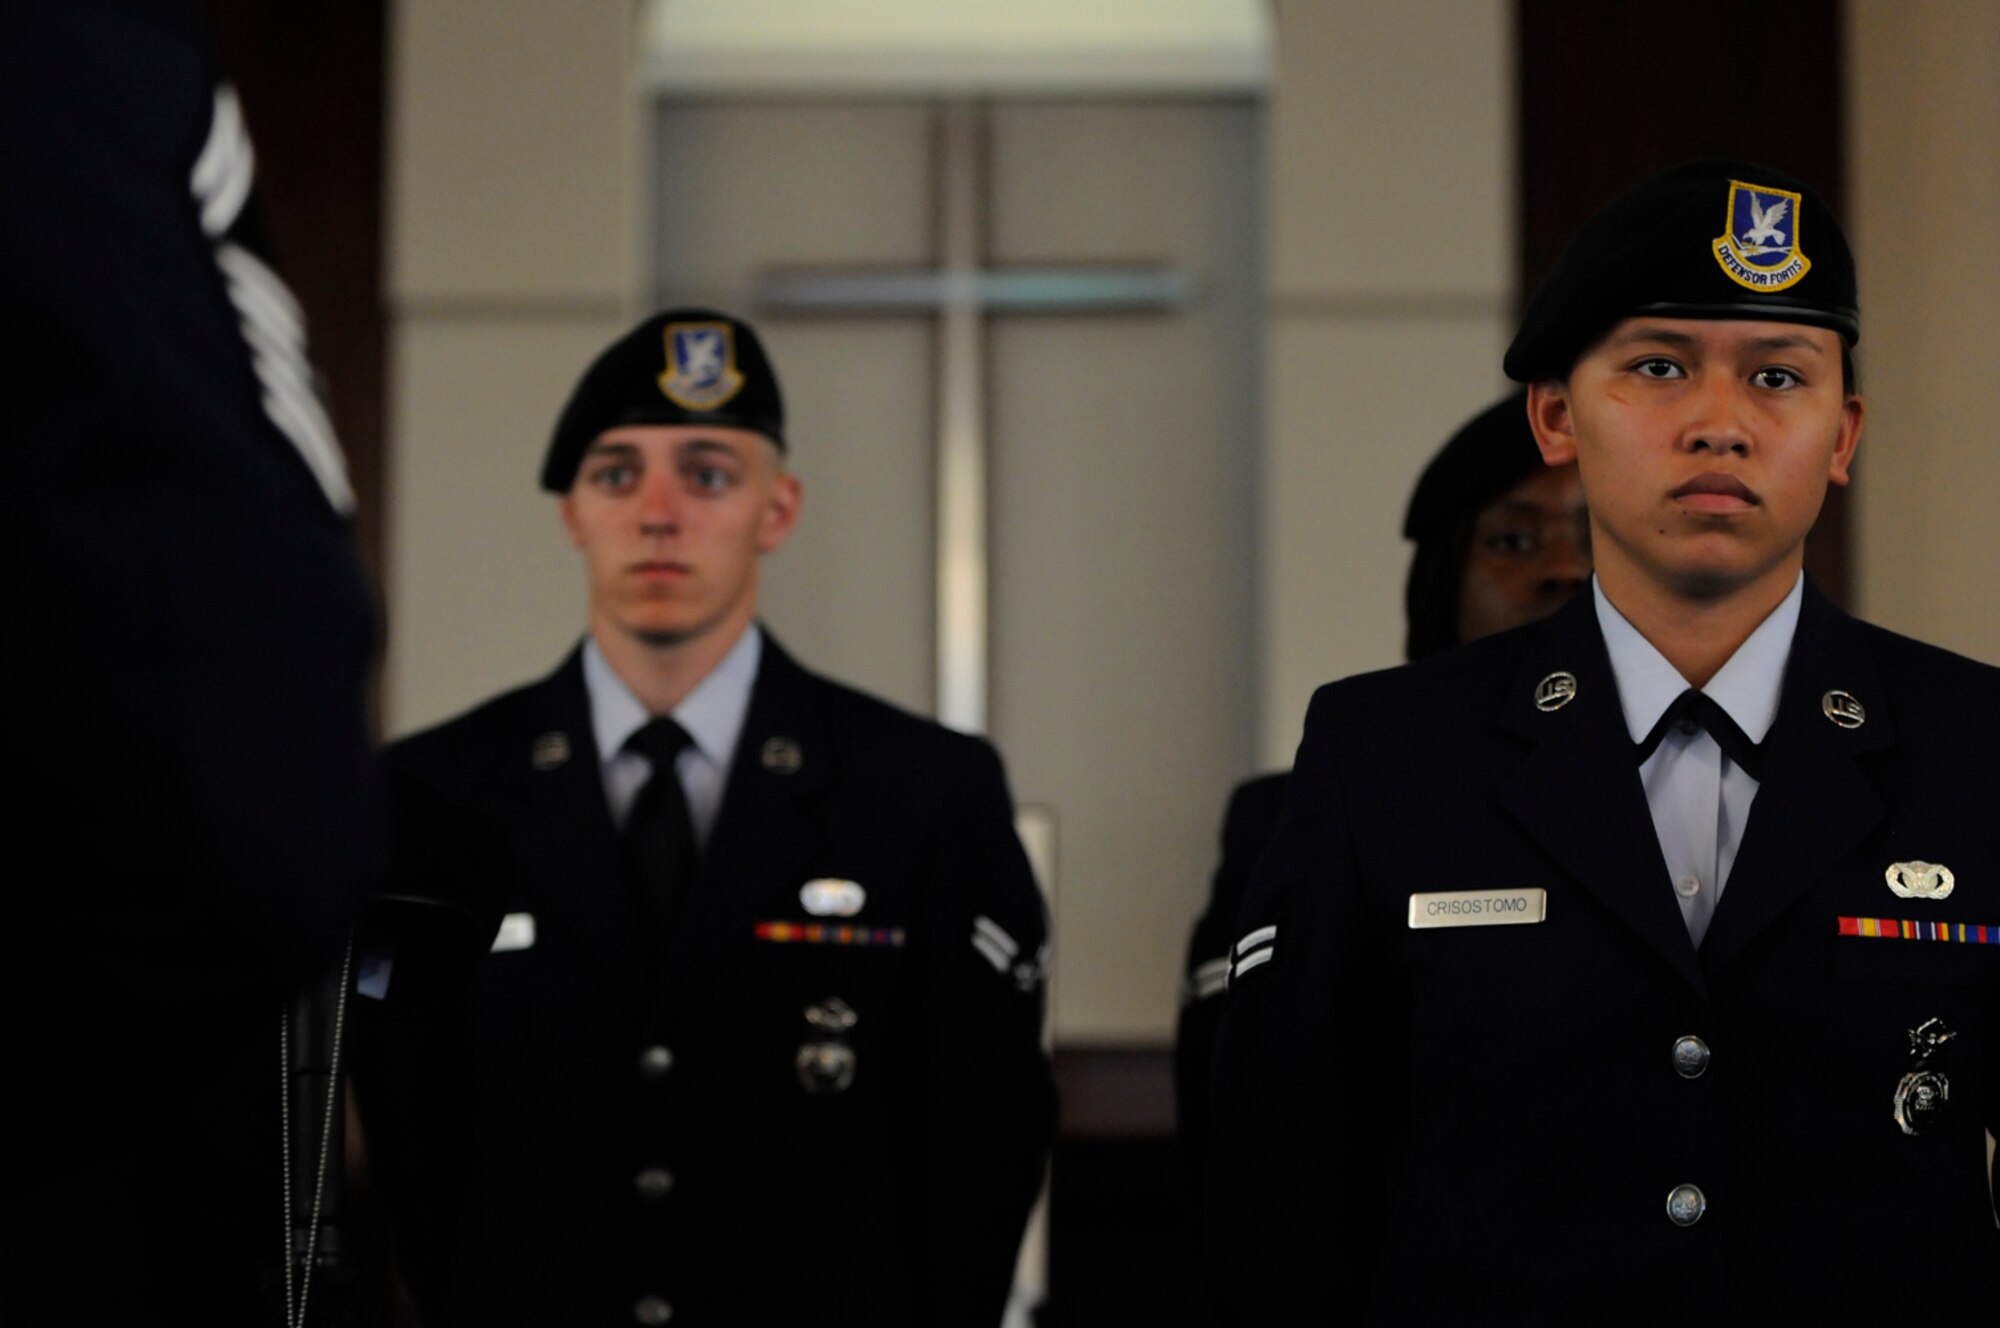 Airman 1st Class Tianna Crisostomo, 65th Security Forces Squadron, stands in the final guard mount formation during the memorial service for Senior Airman Amber Finnell, 65th SFS, at Lajes Field July 2. Airman Finnell was from East Tawas, Mich. and entered the Air Force in Feb. 2004.  She had been previously stationed at Minot AFB, N.D. and Sather AB, Baghdad, Iraq; she passed away on June 30, 2009.  (U.S. Air Force photo by Tech. Sgt. Darrell I. Dean)